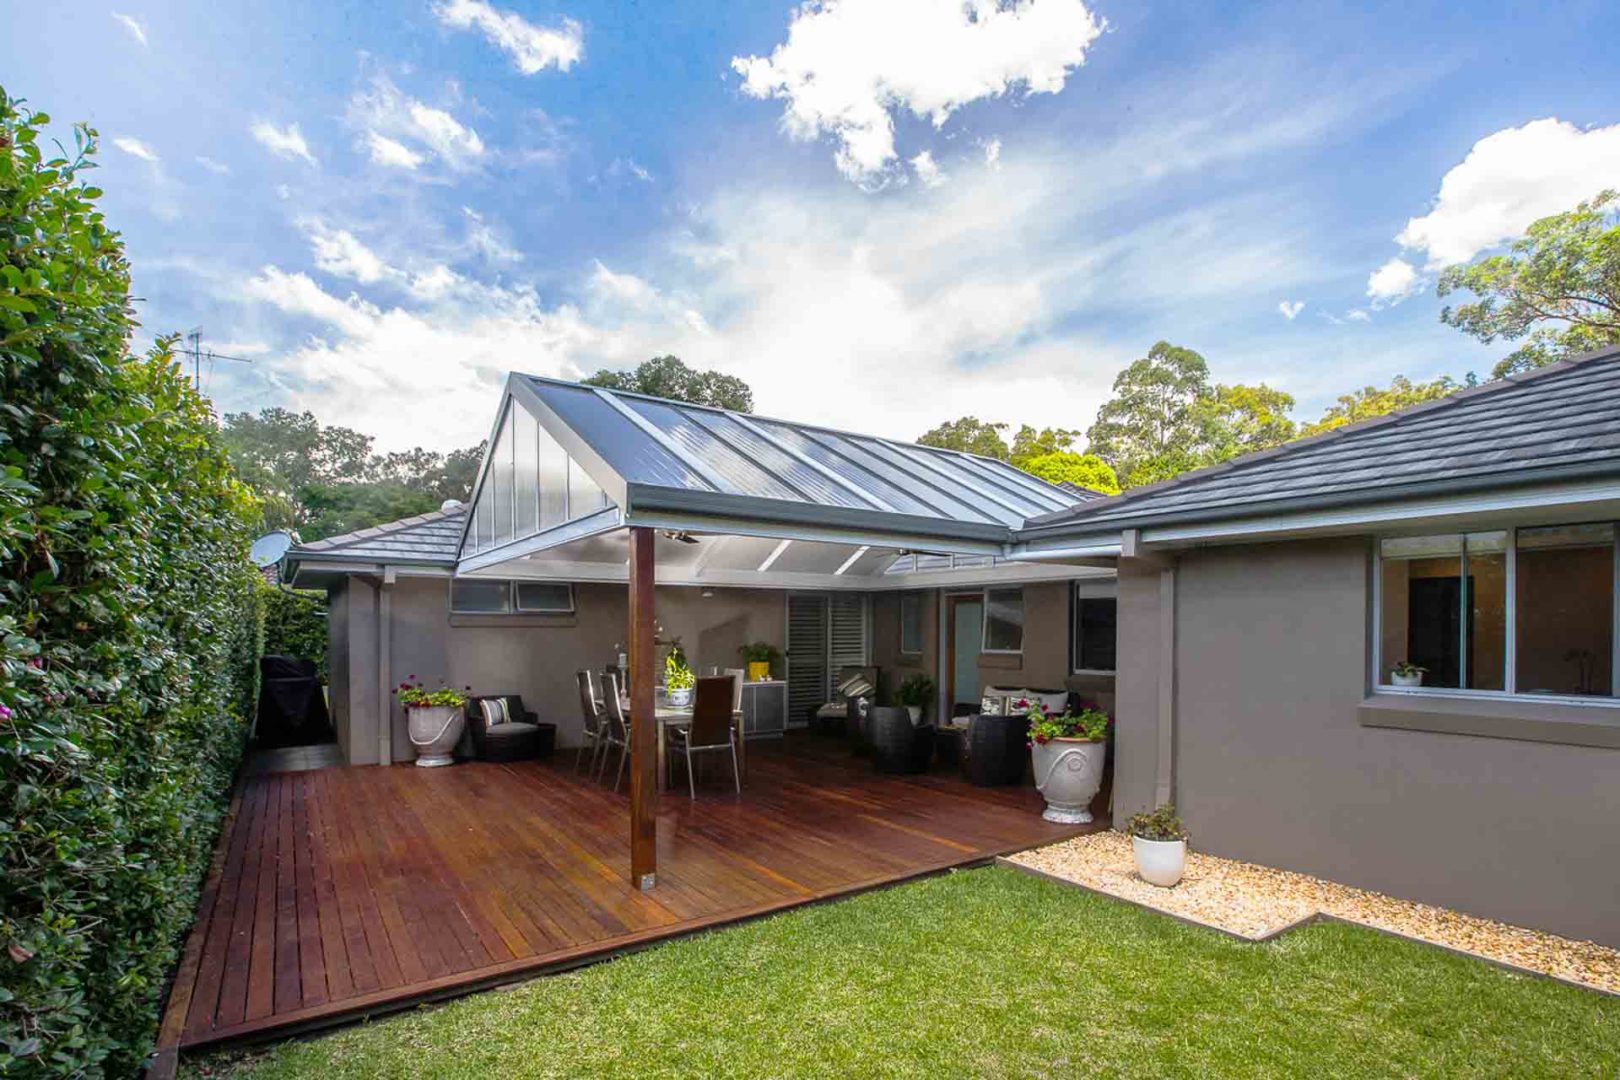 How to design your pergola or verandah - A bit of greenery can bring your outdoor space to life, Australian Outdoor Living